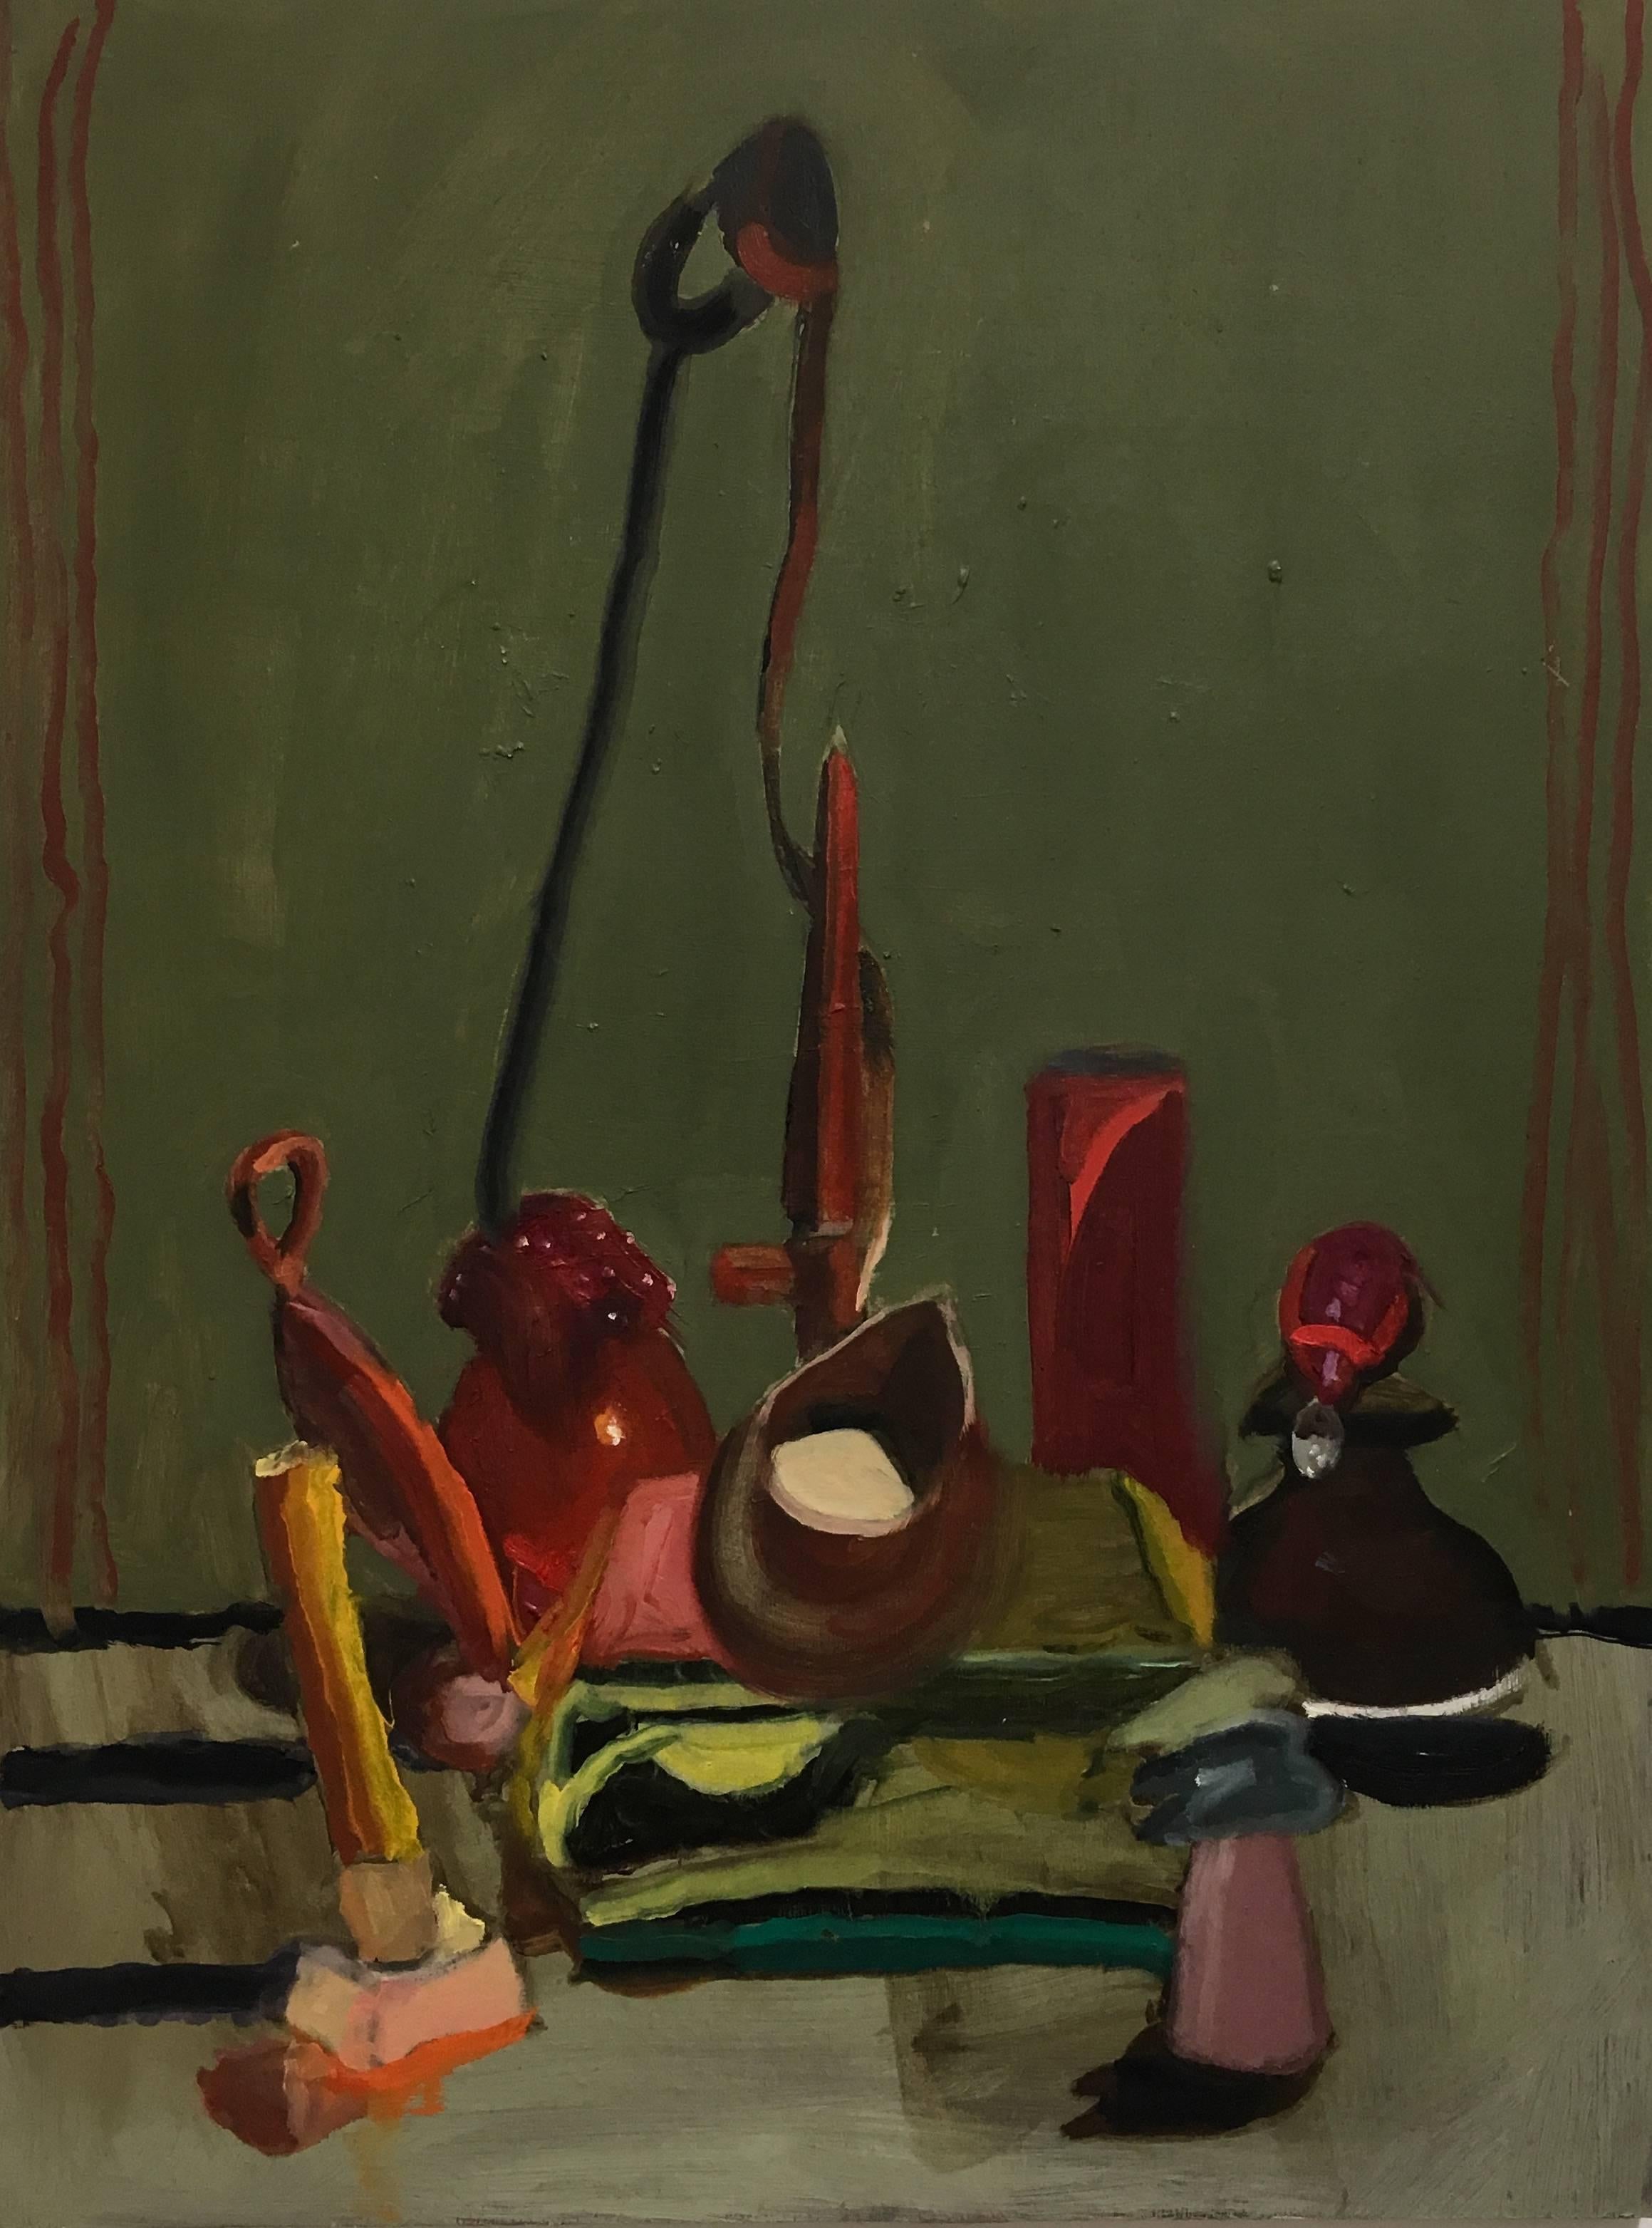 Contemporary still life oil painting by American painter Meg Franklin.

"Green Still Life," 2015
Oil on panel. 
24 x 18 in.

Meg Franklin is a Brooklyn-based painter originally from rural Northeast Georgia. She paints still lifes made up of objects